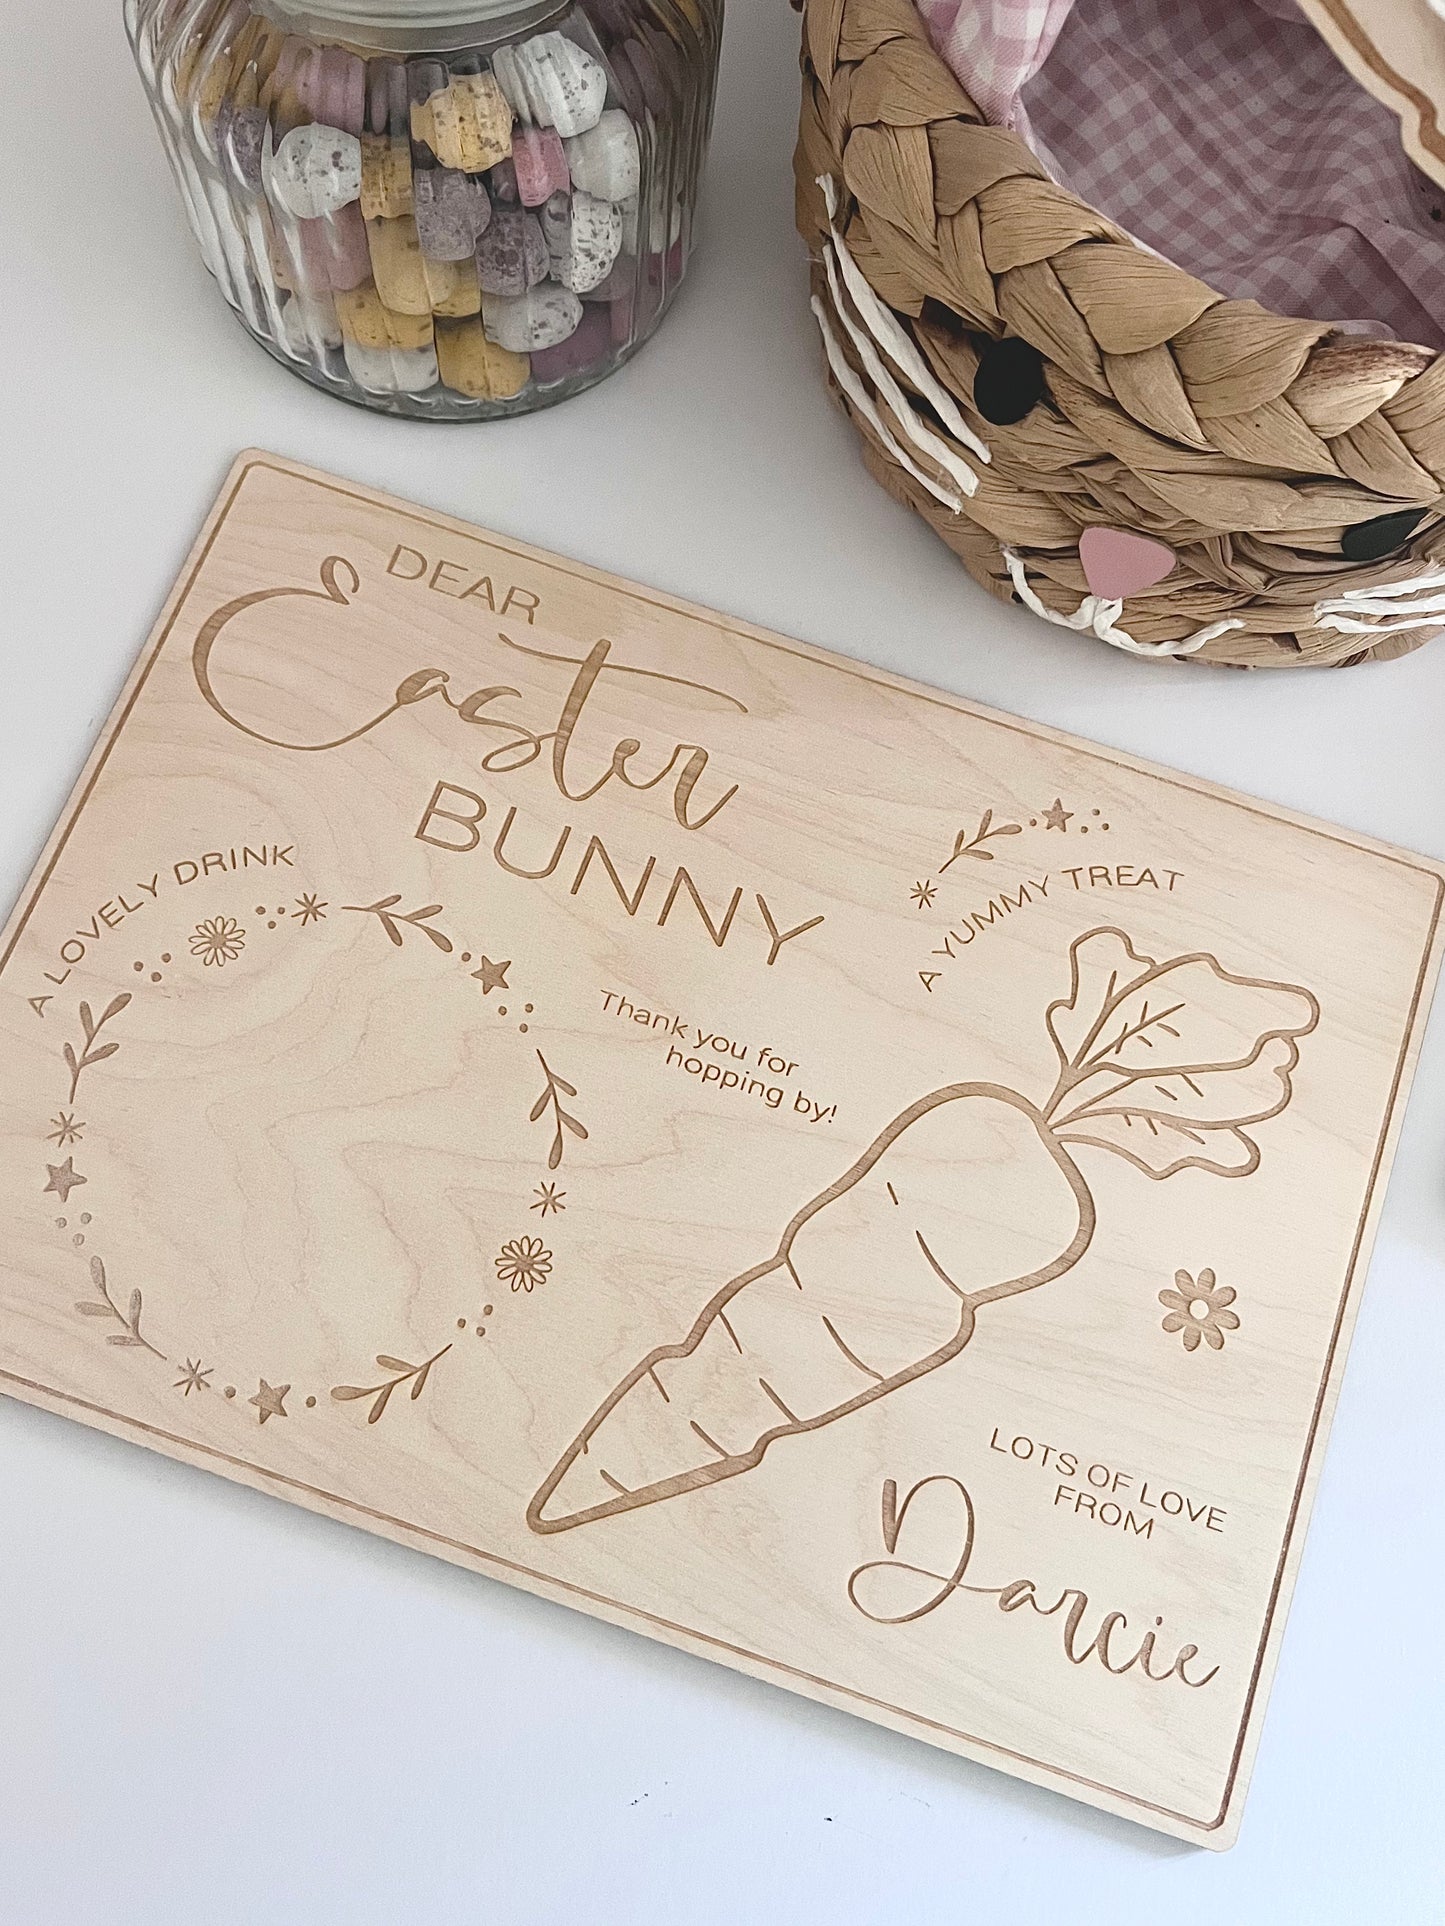 Personalised Easter Bunny Treat Board